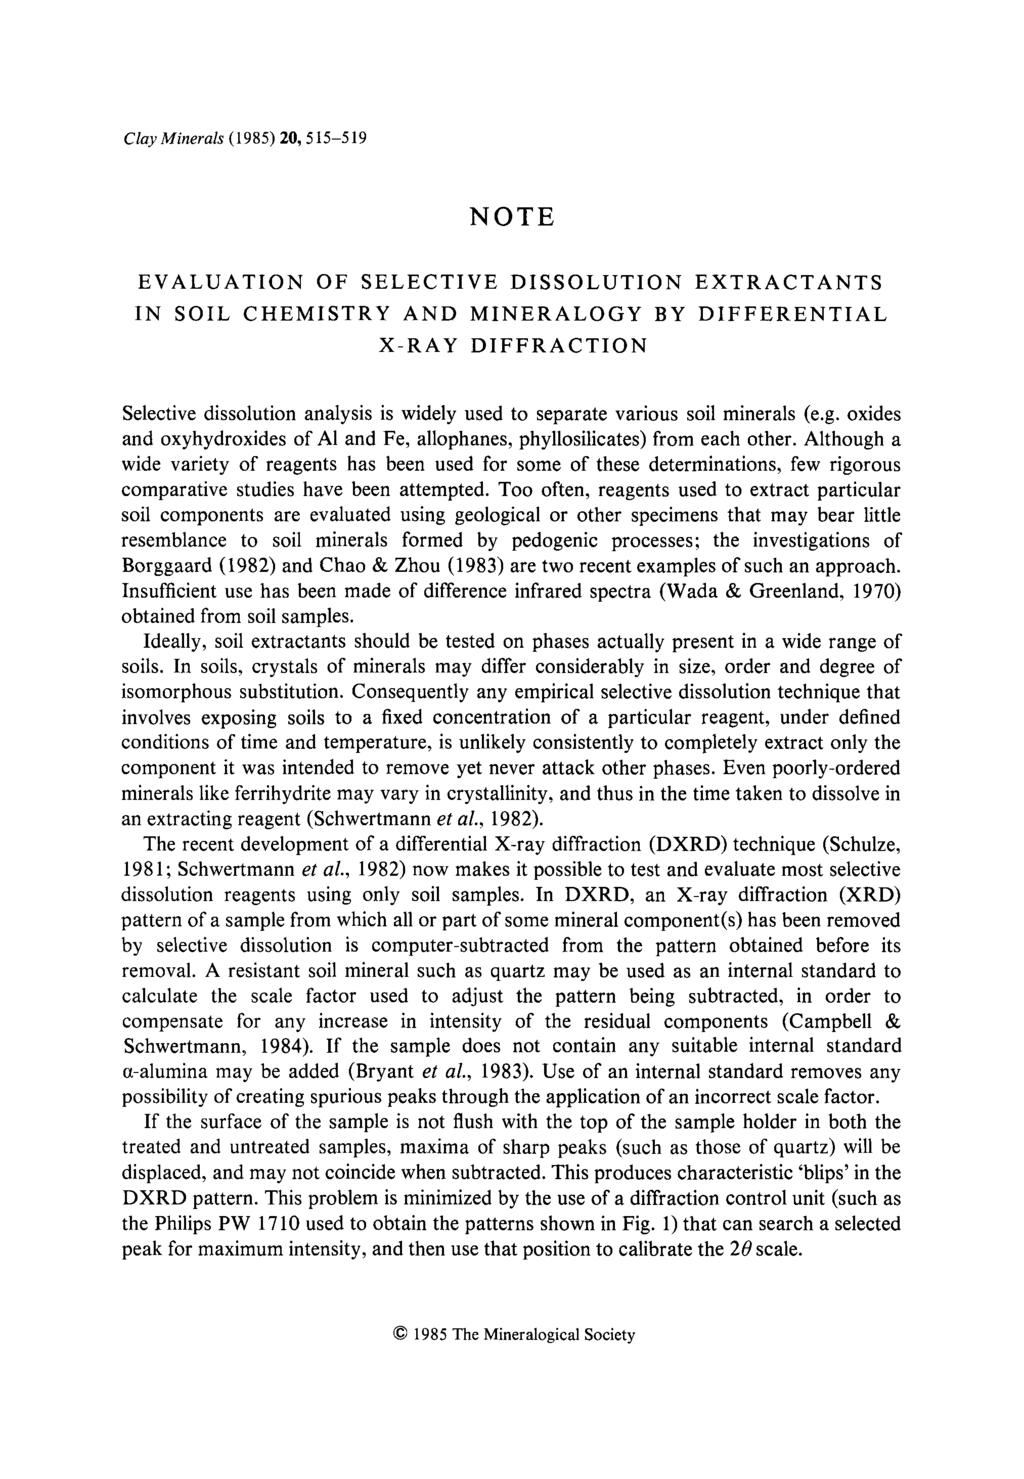 Clay Minerals ( 1985) 20, 515-519 NOTE EVALUATION OF SELECTIVE DISSOLUTION EXTRACTANTS IN SOIL CHEMISTRY AND MINERALOGY BY DIFFERENTIAL X-RAY DIFFRACTION Selective dissolution analysis is widely used